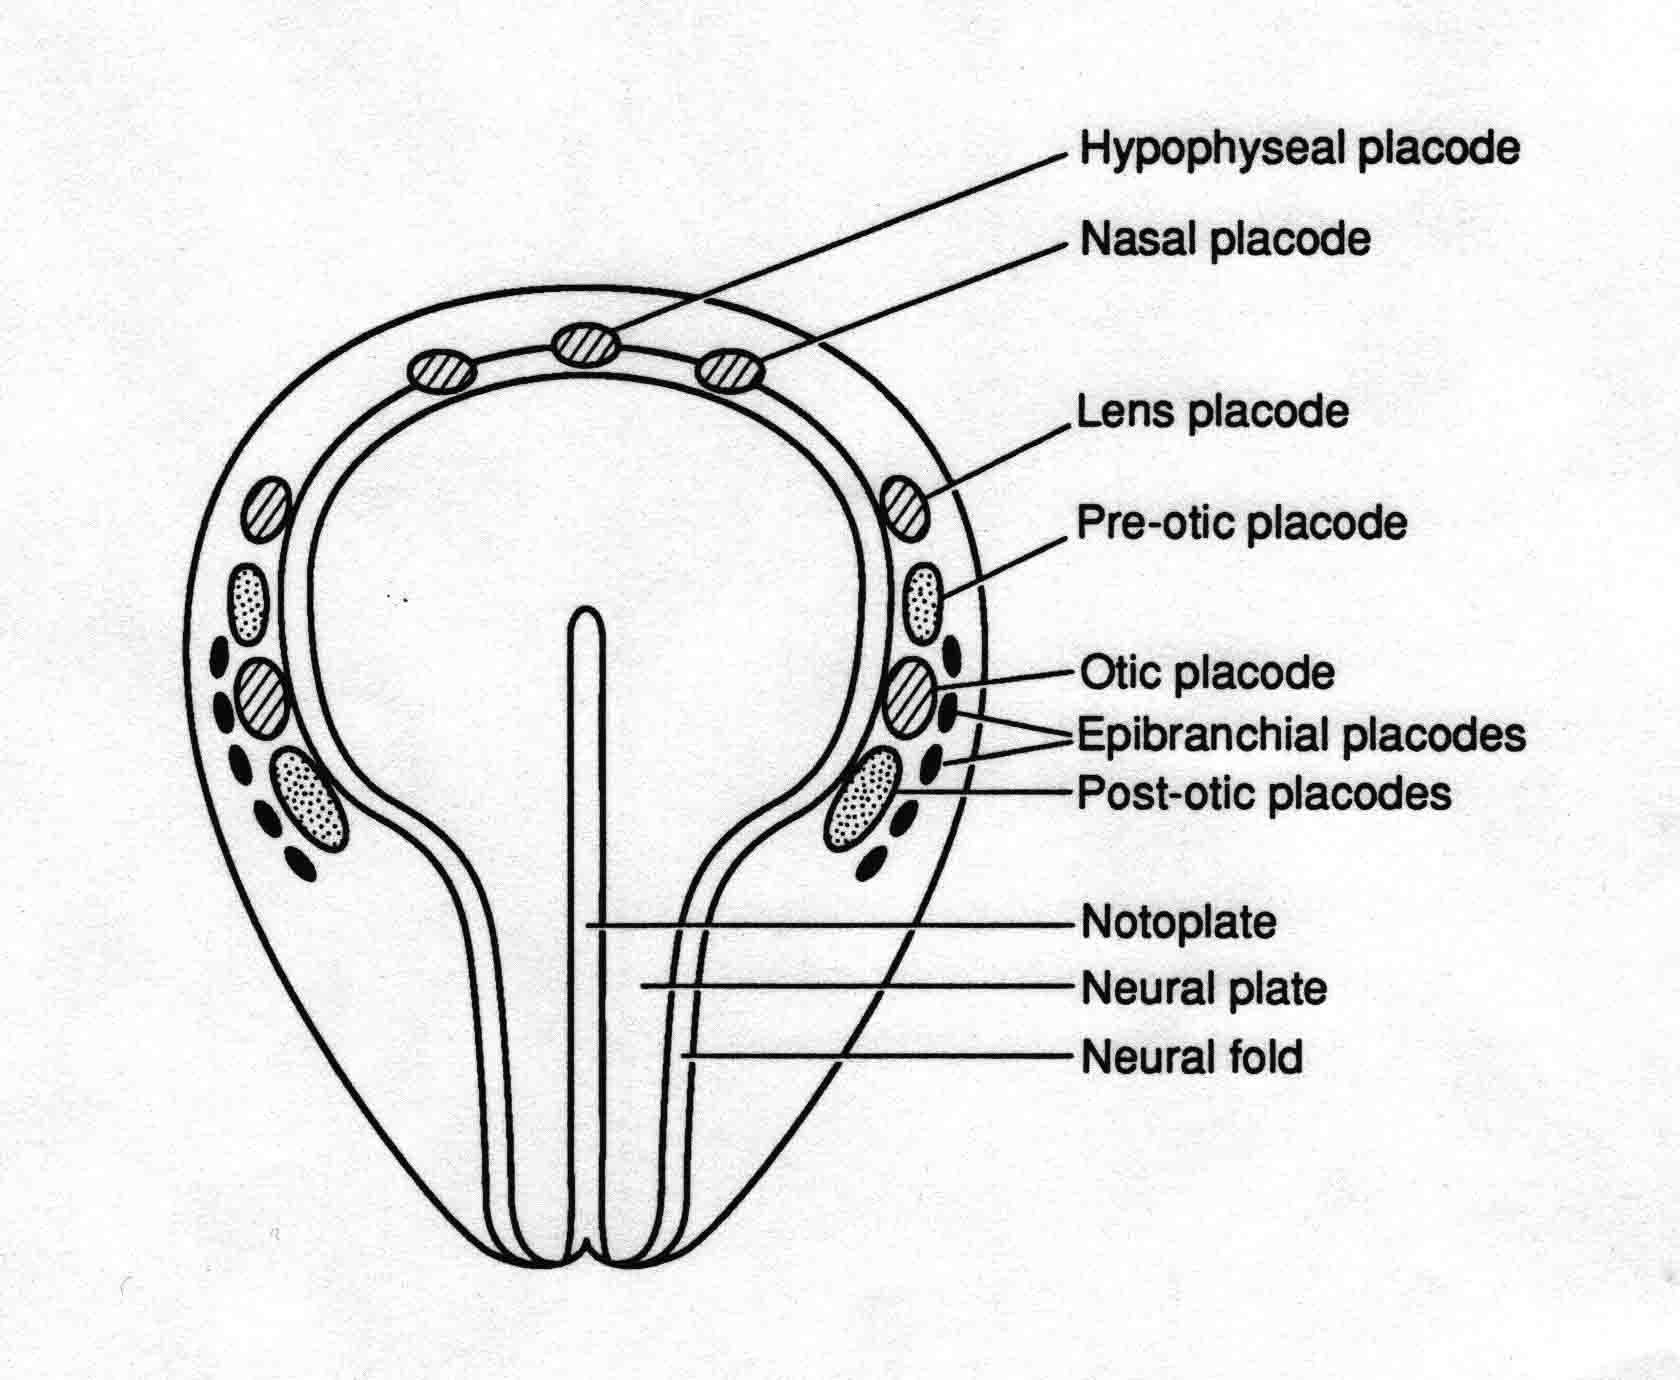 Positions of the epidermal pacodes at the open neural plate stage of a